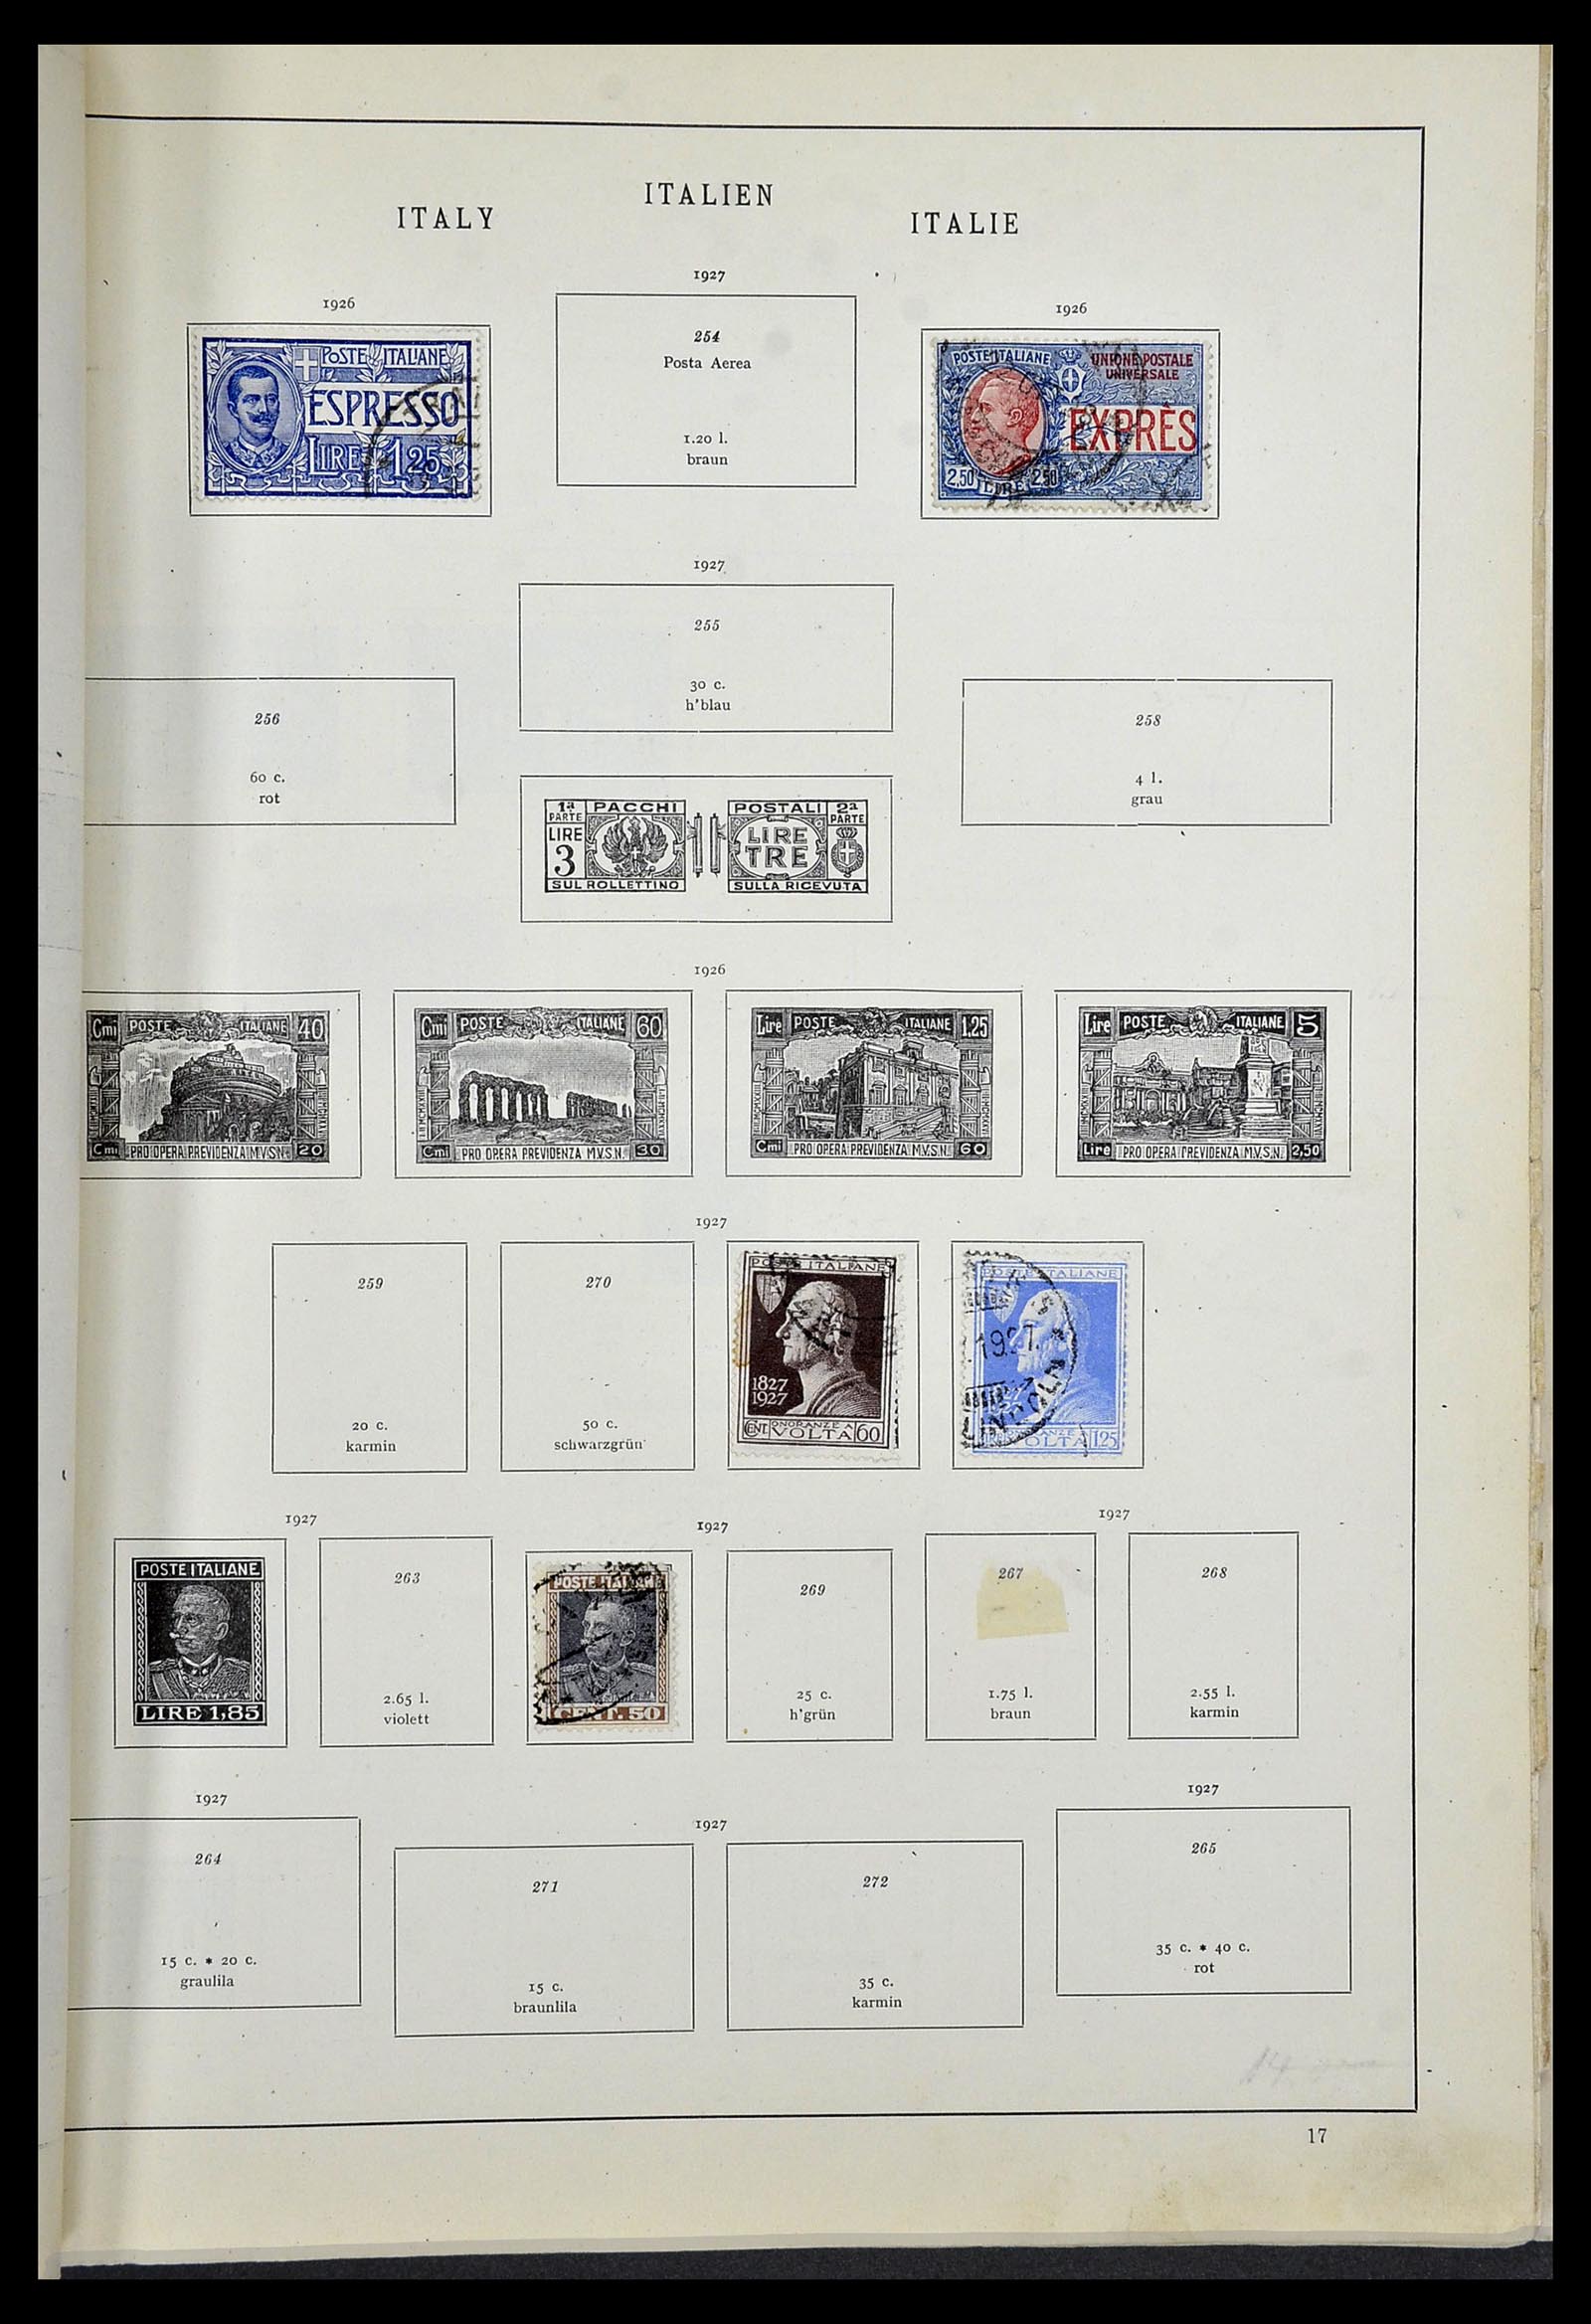 33619 012 - Stamp collection 33619 Italian territories/occupation/colonies 1874-1945